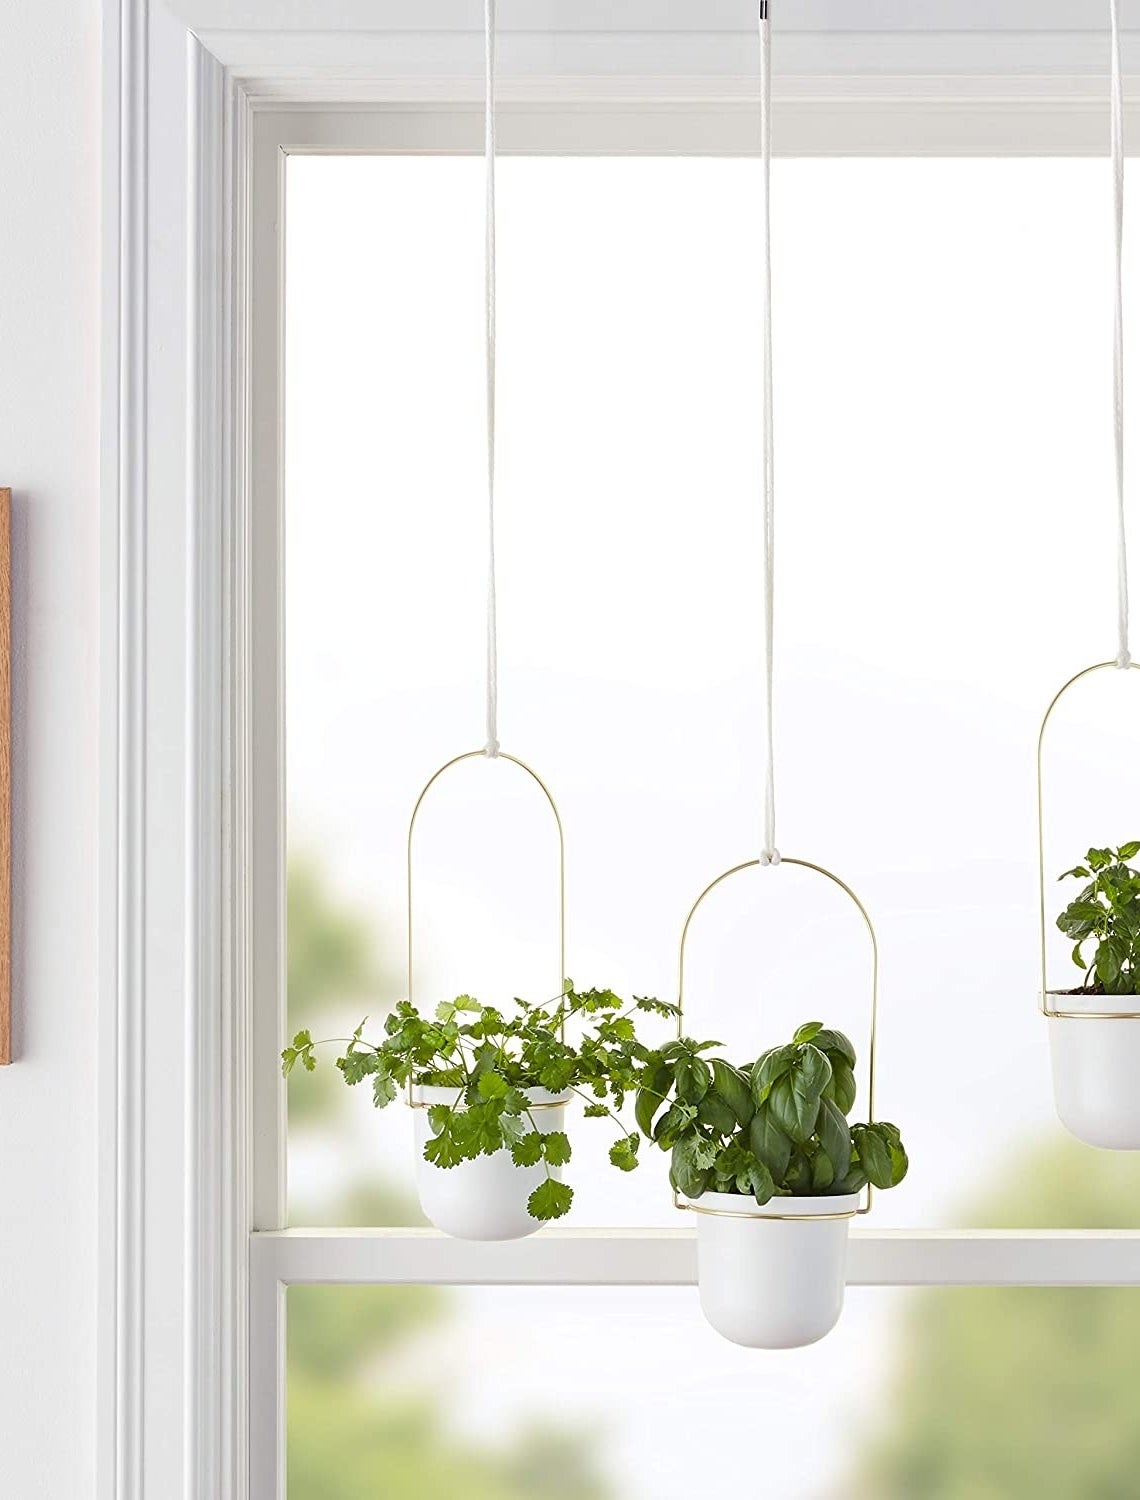 The set of three planters with herbs in them, in front of a window